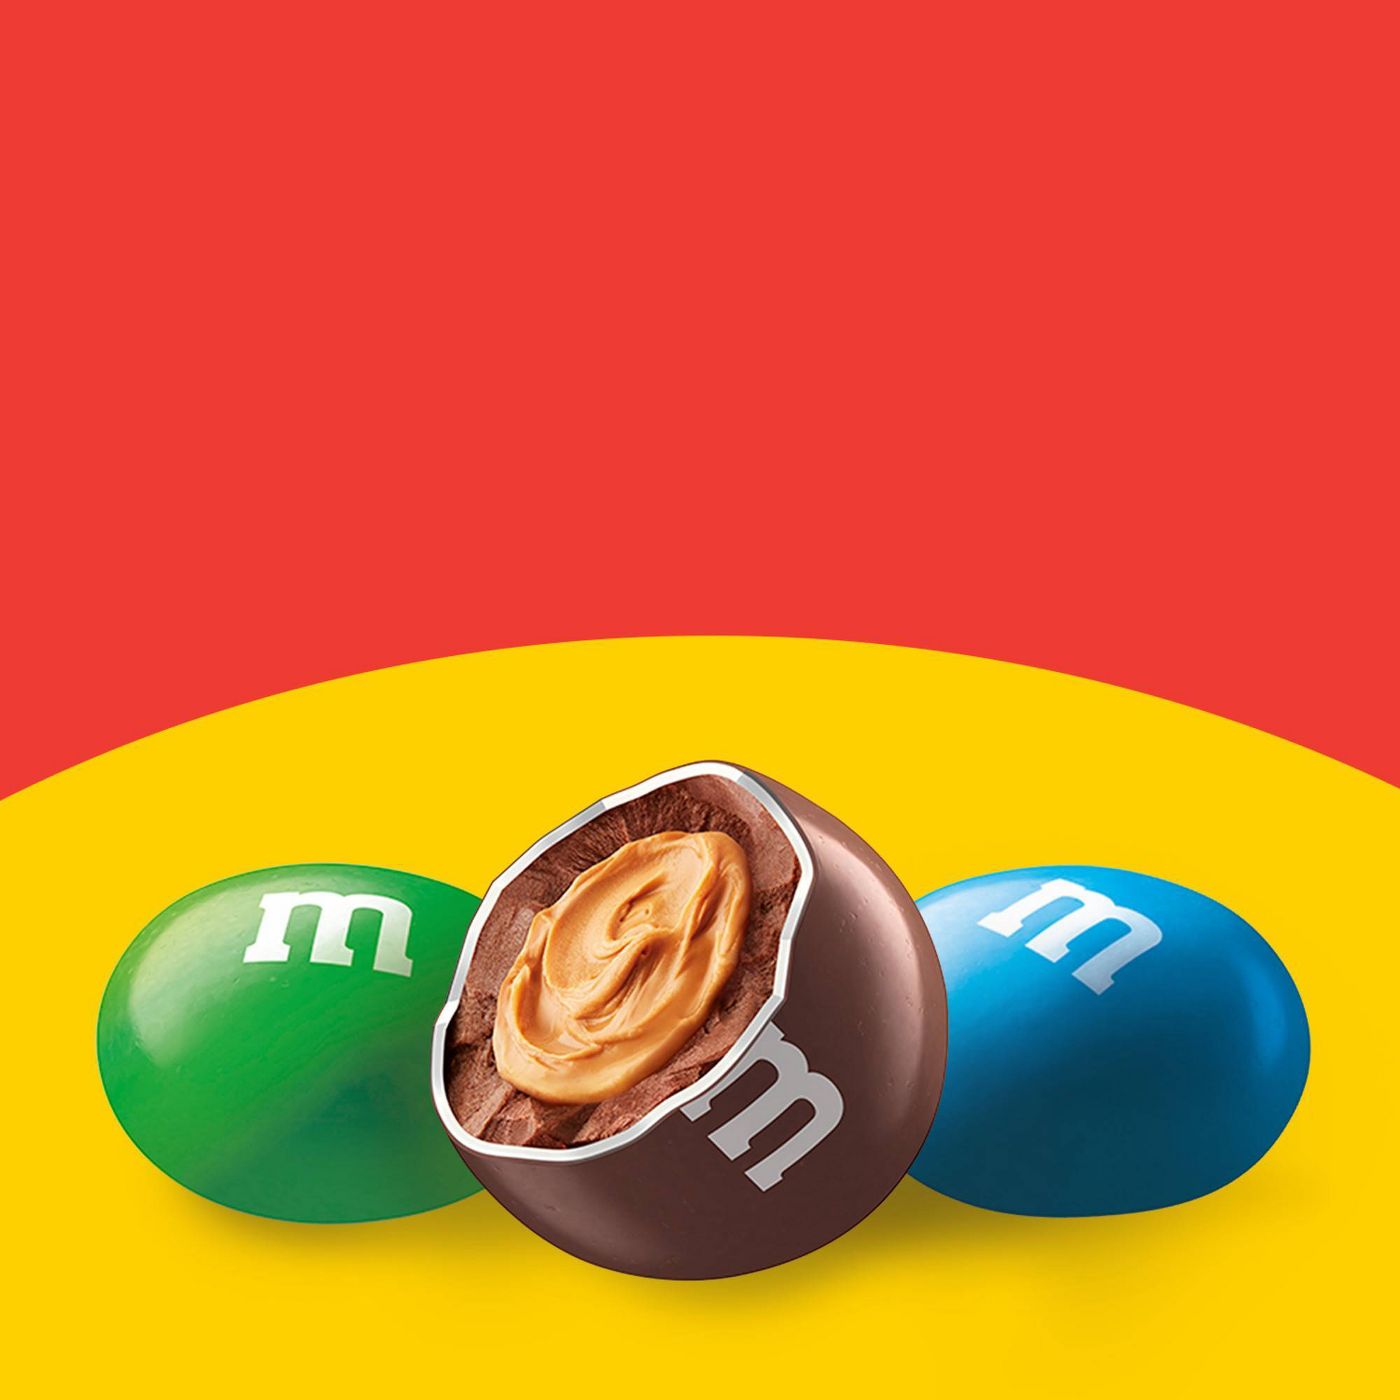 M&M's Peanut Butter Chocolate Candies, Family Size, 18.4oz